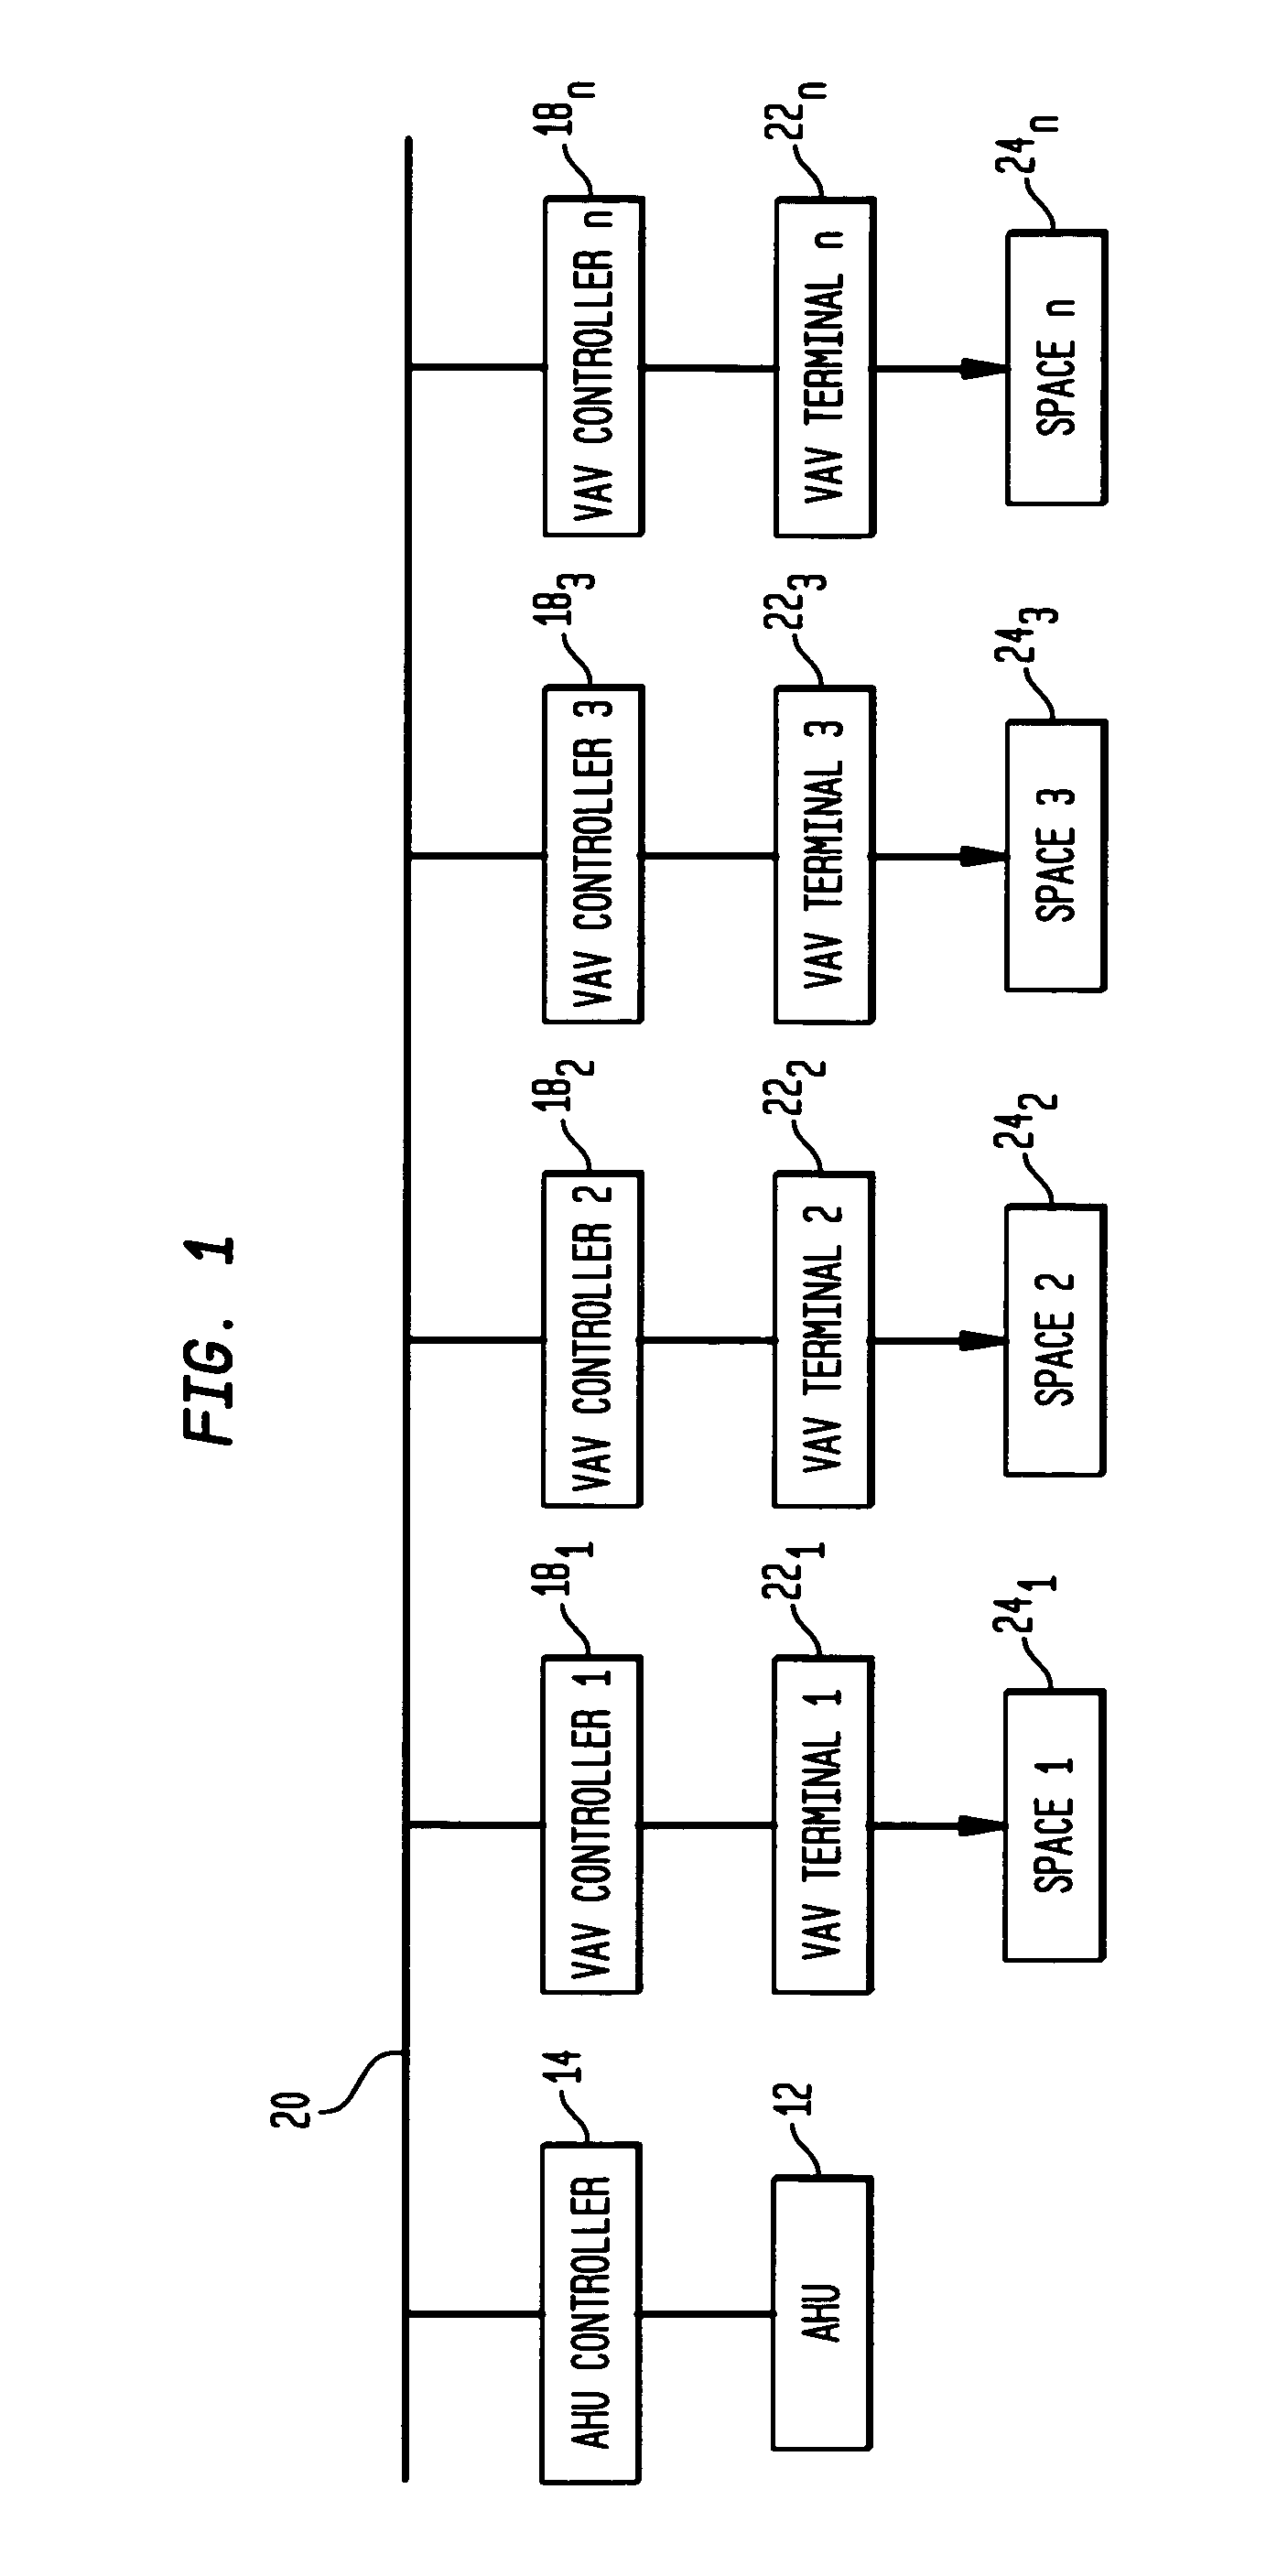 Multi-node utilization of a single network variable input for computation of a single control variable at a sink node